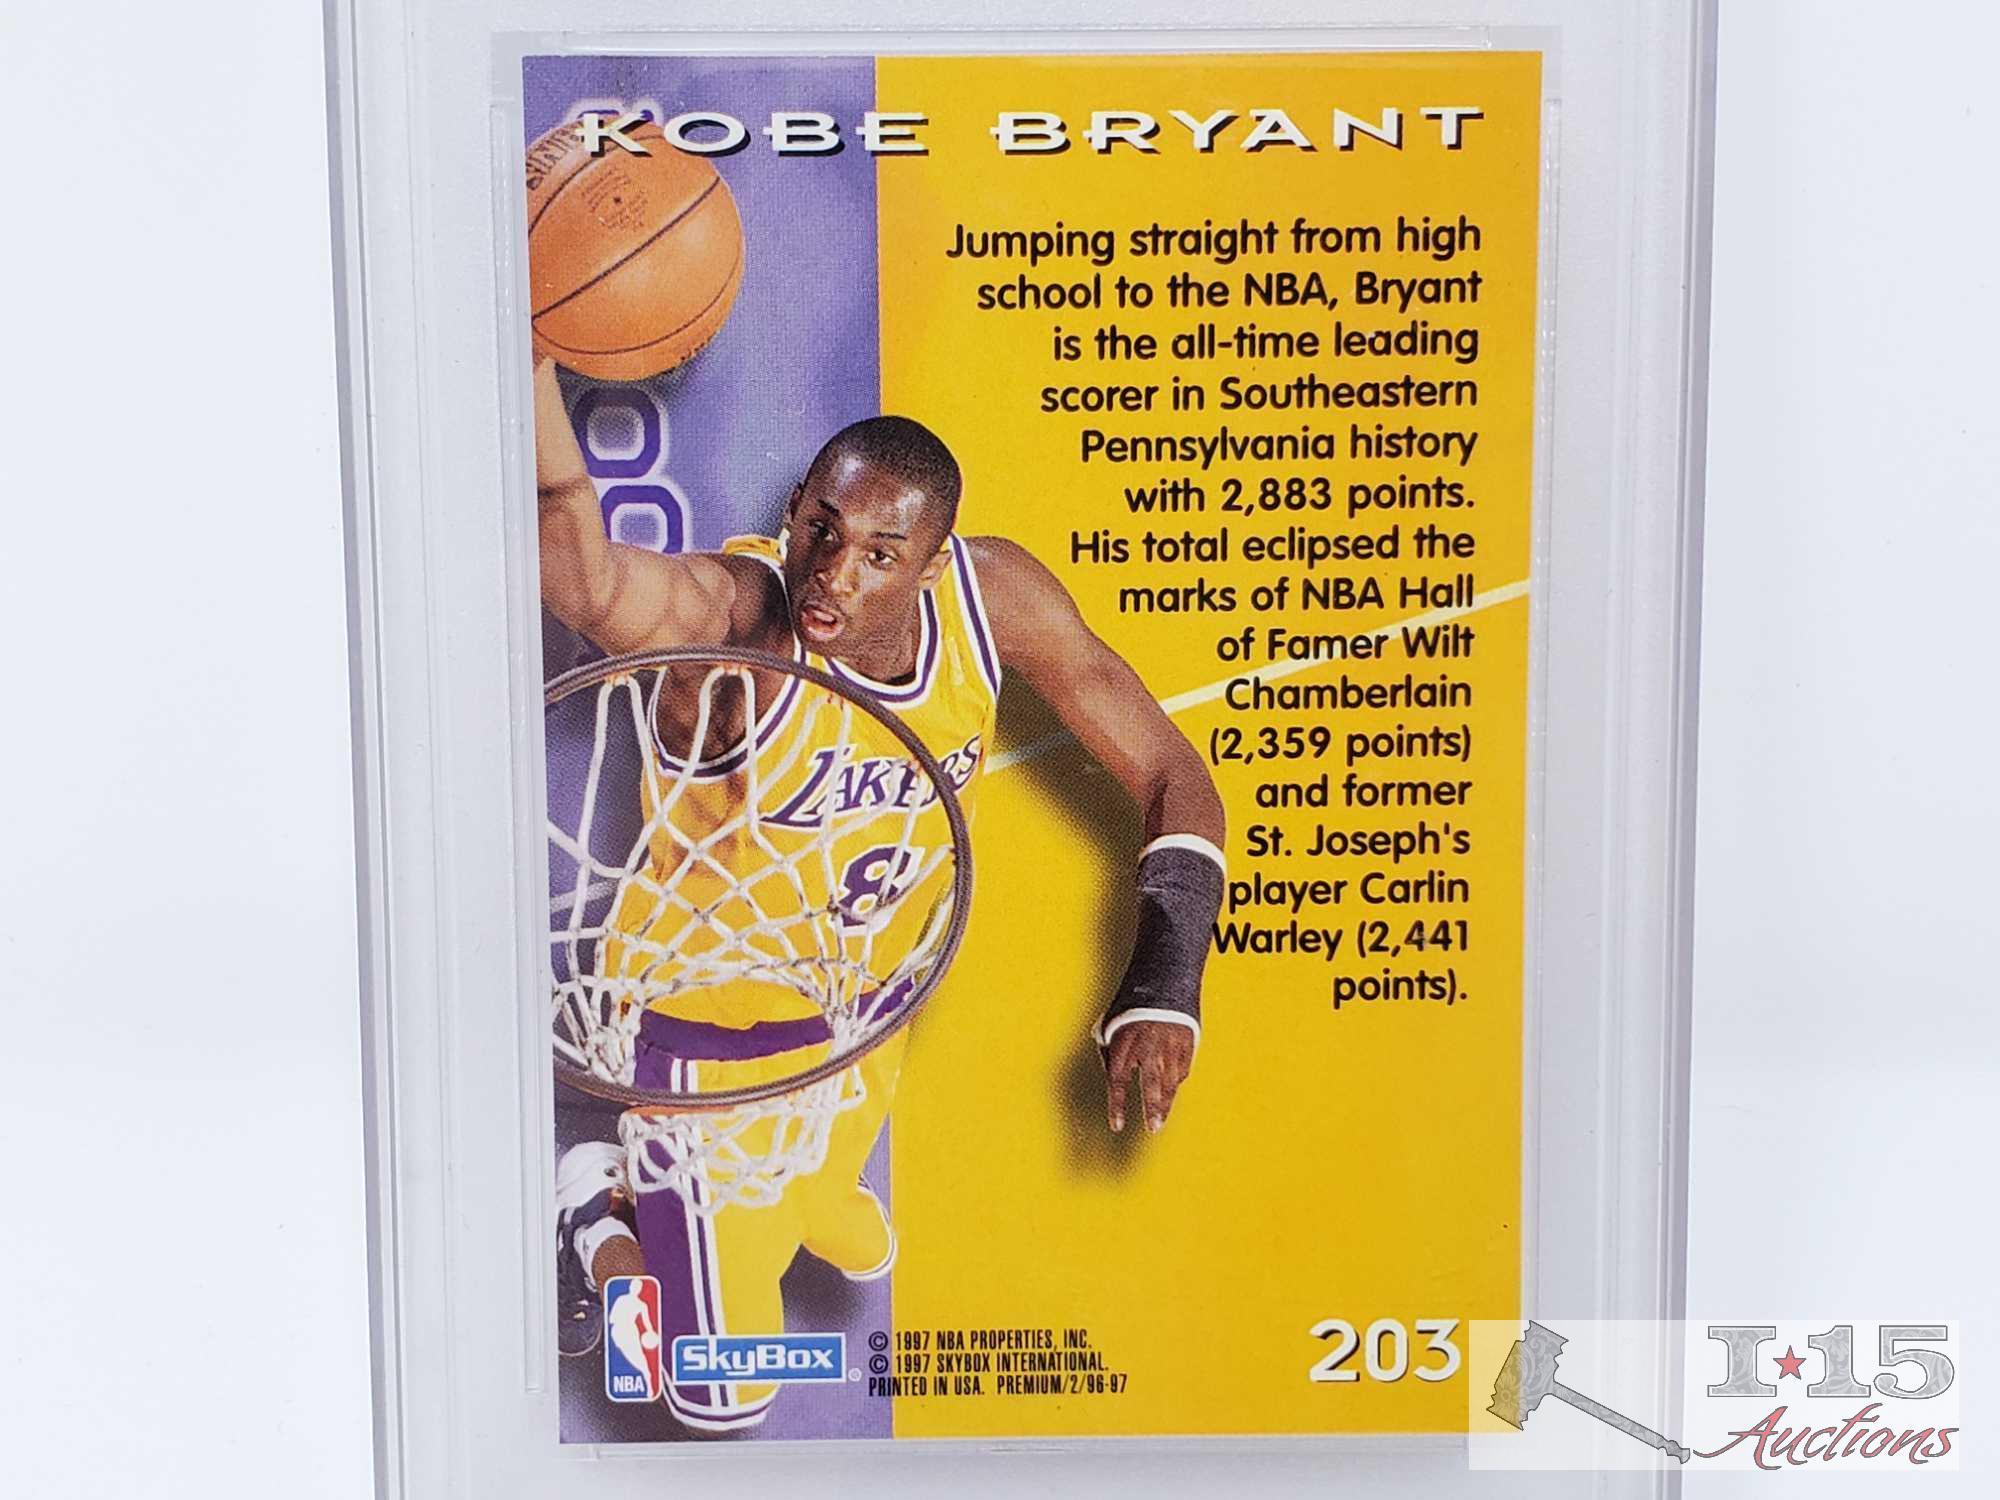 1996-97 Skybox Premium and Hoops Pro Graded Kobe Bryant Rookie Cards